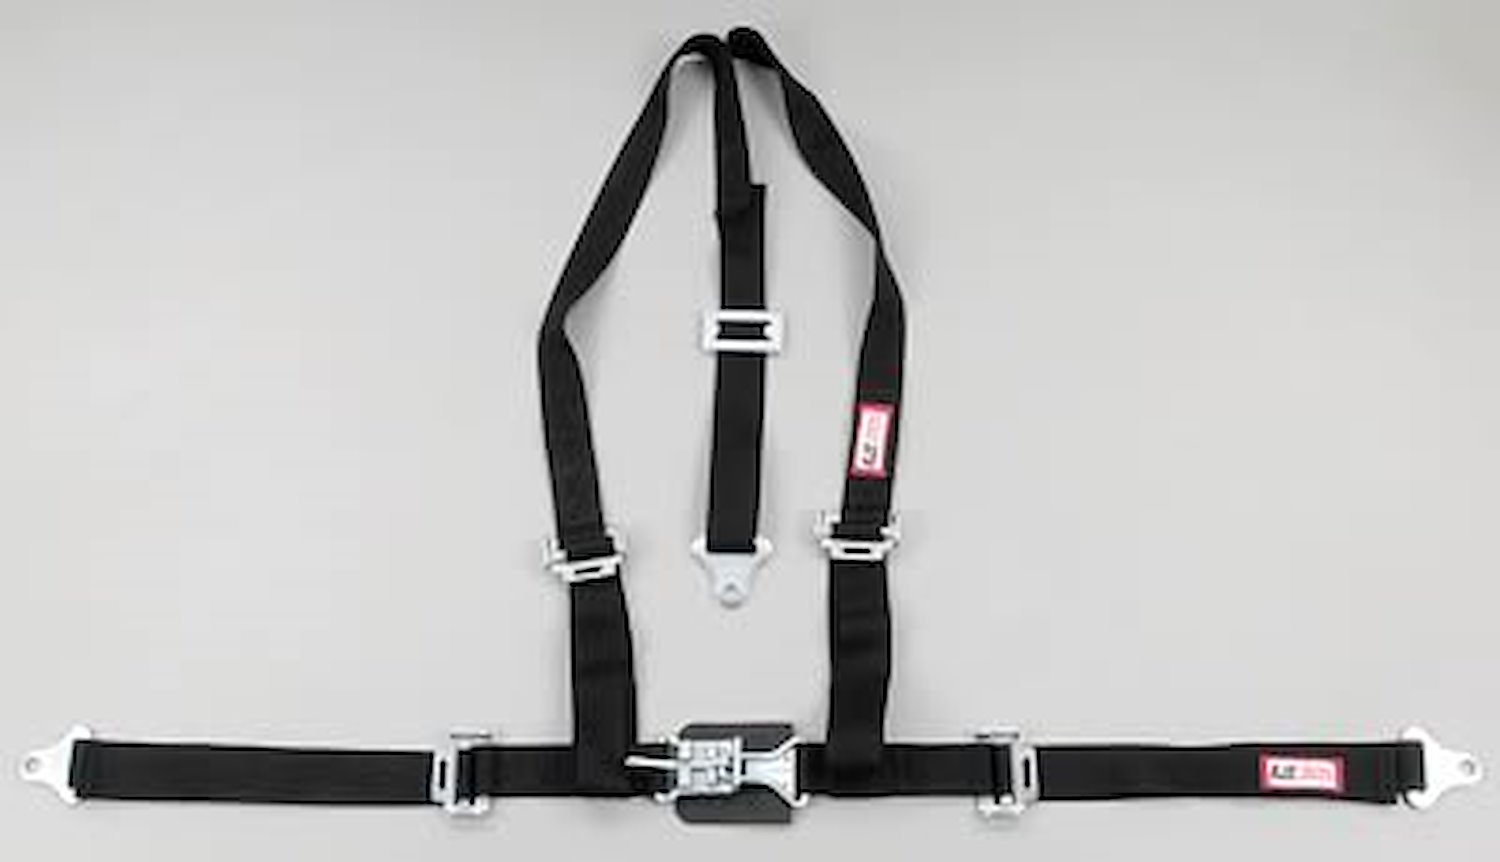 NON-SFI L&L HARNESS 3 PULL UP Lap BELT SNAP SEWN IN 2 S.H. Y FLOOR Mount WRAP/SNAP ORANGE